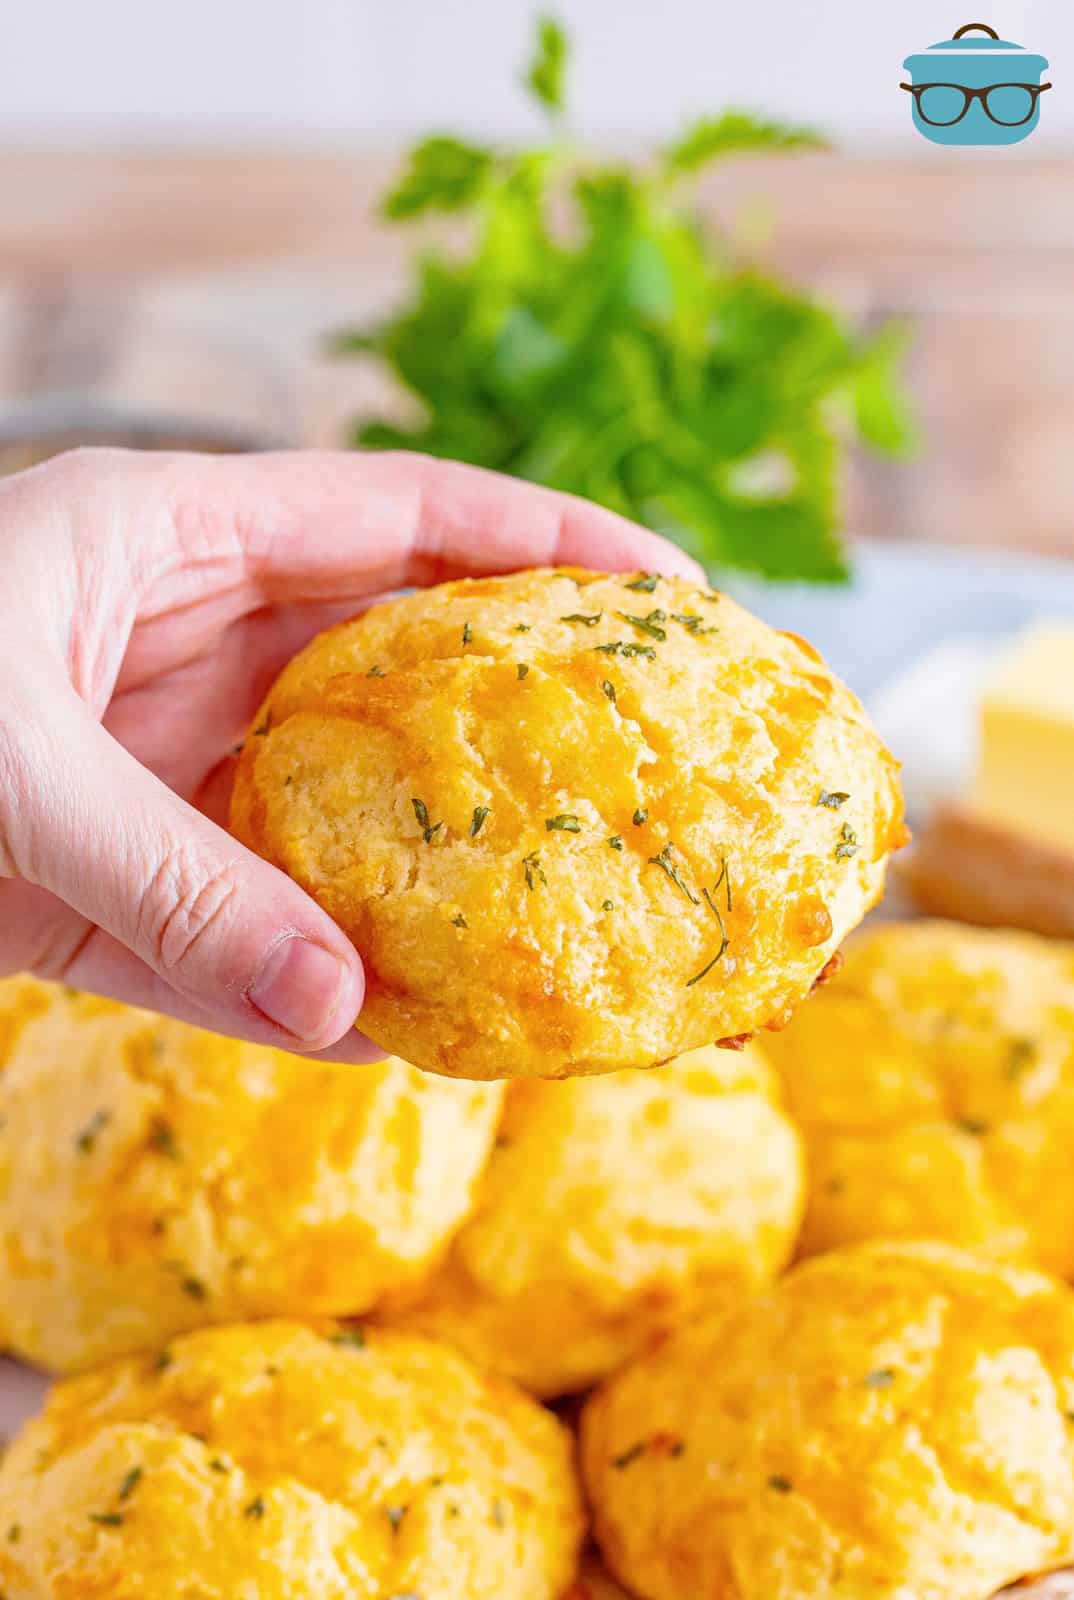 A hand holding a cheddar biscuit.